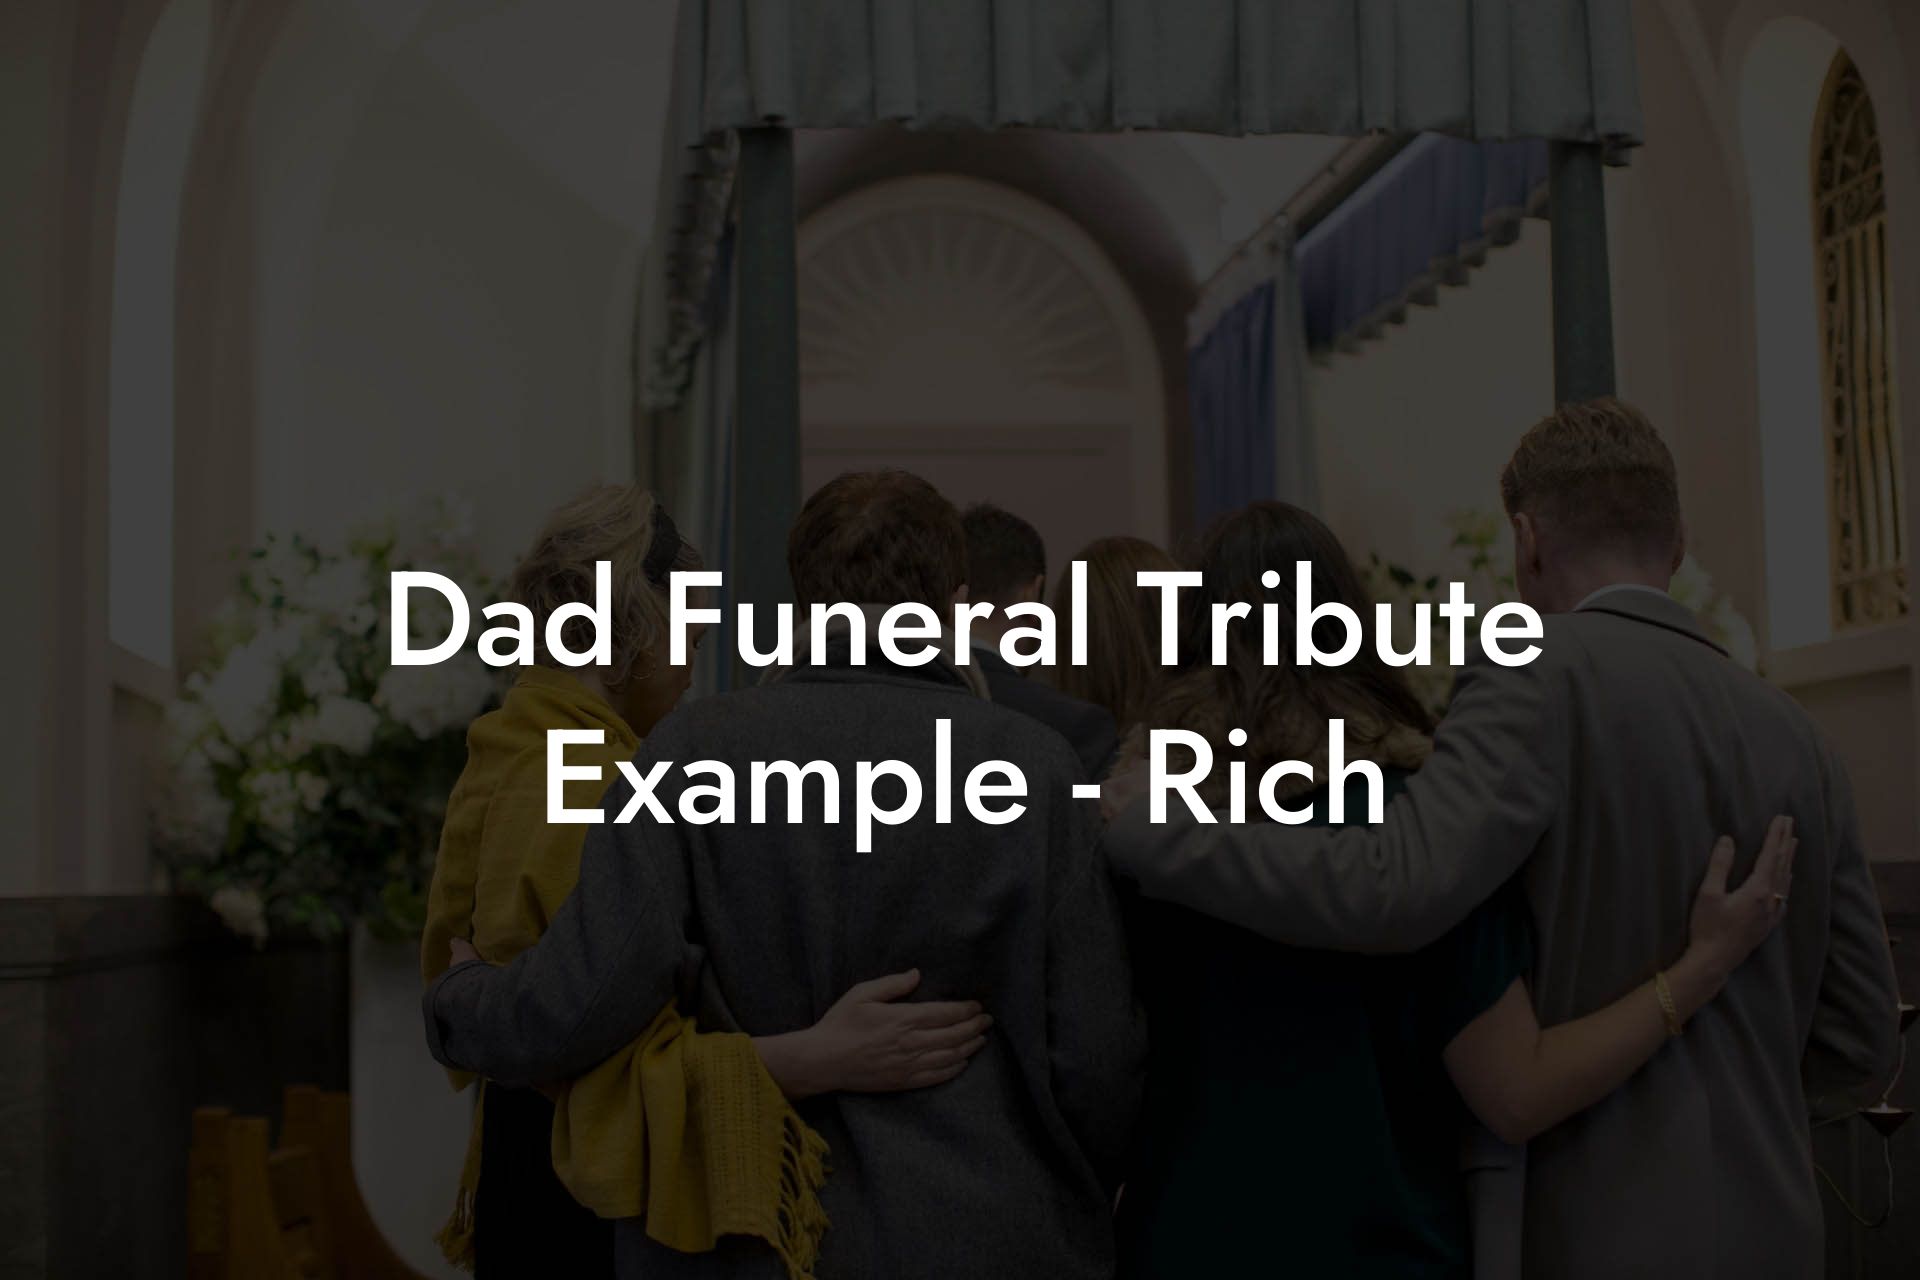 Dad Funeral Tribute Example - Rich